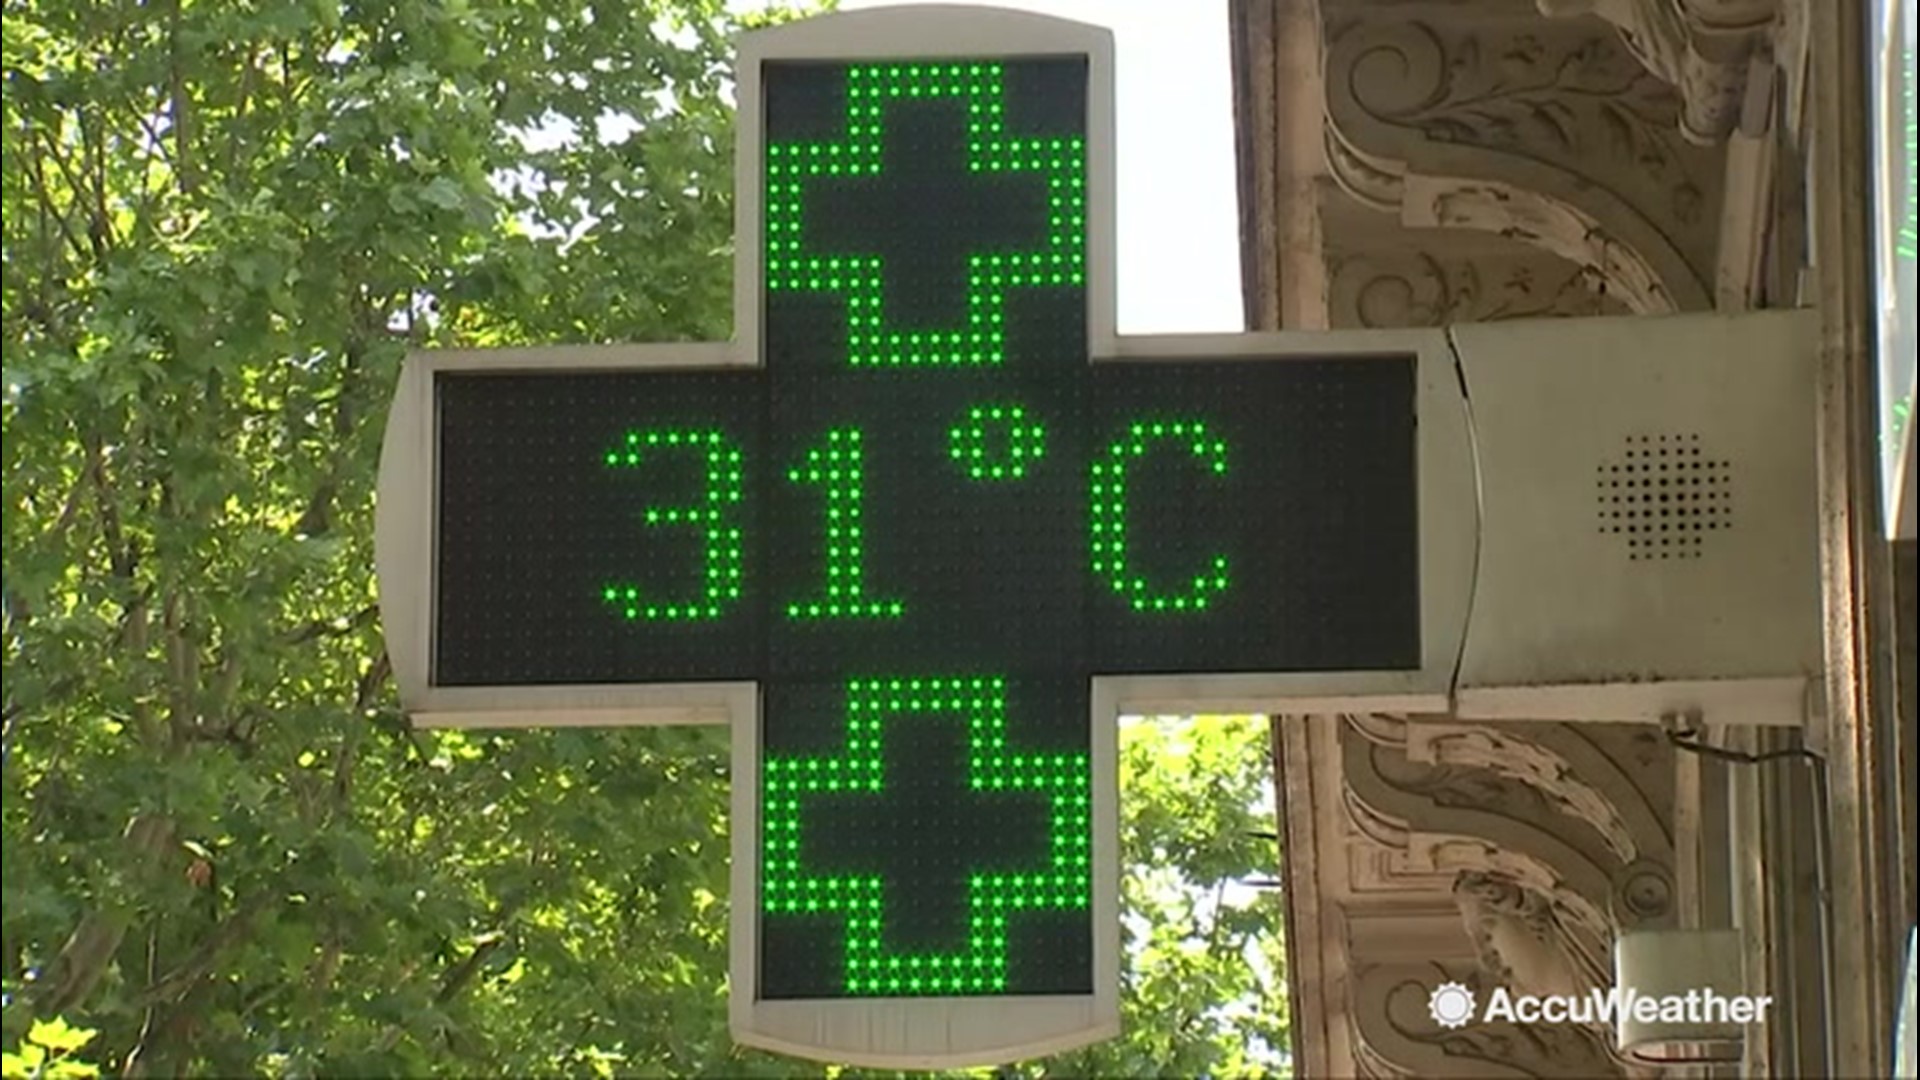 A heatwave has brought temperatures of over 100 degrees to Paris, France. While it may be hot, that's not stopping many residents and tourists alike from getting out and enjoying the sunny weather.